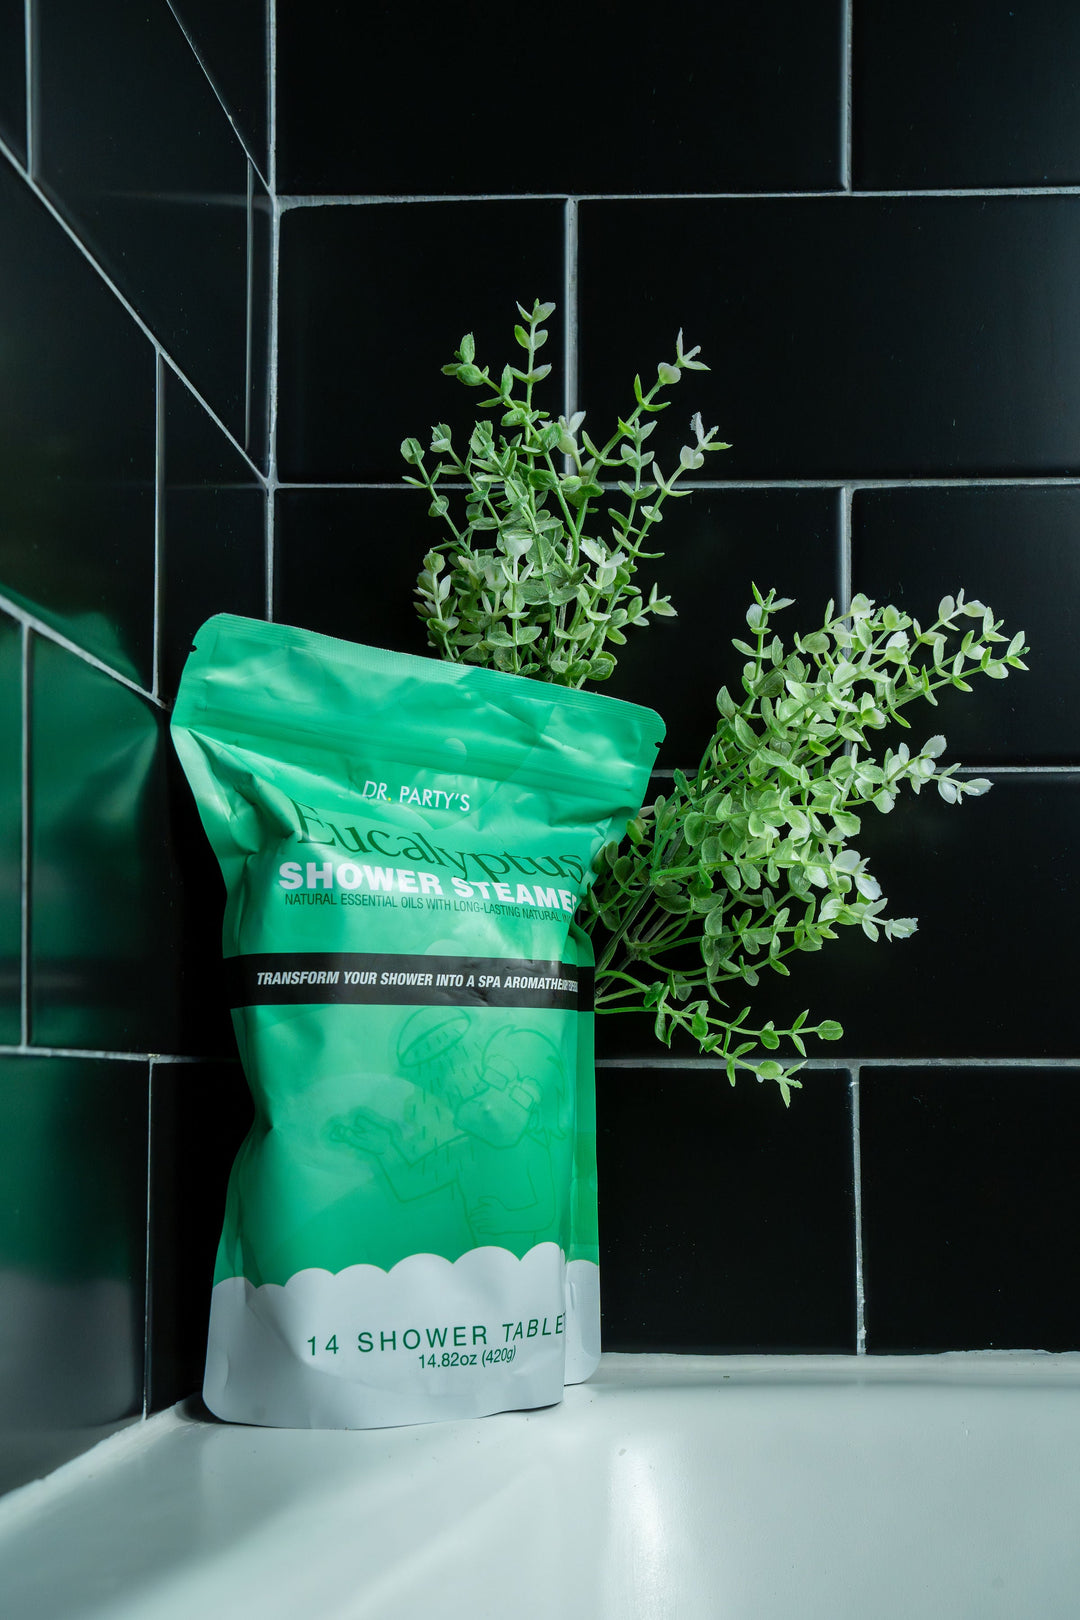 Step into a cloud of eucalyptus with our shower steamers, each pack containing 14 tablets that dissolve to create a serene, spa-like shower every time.